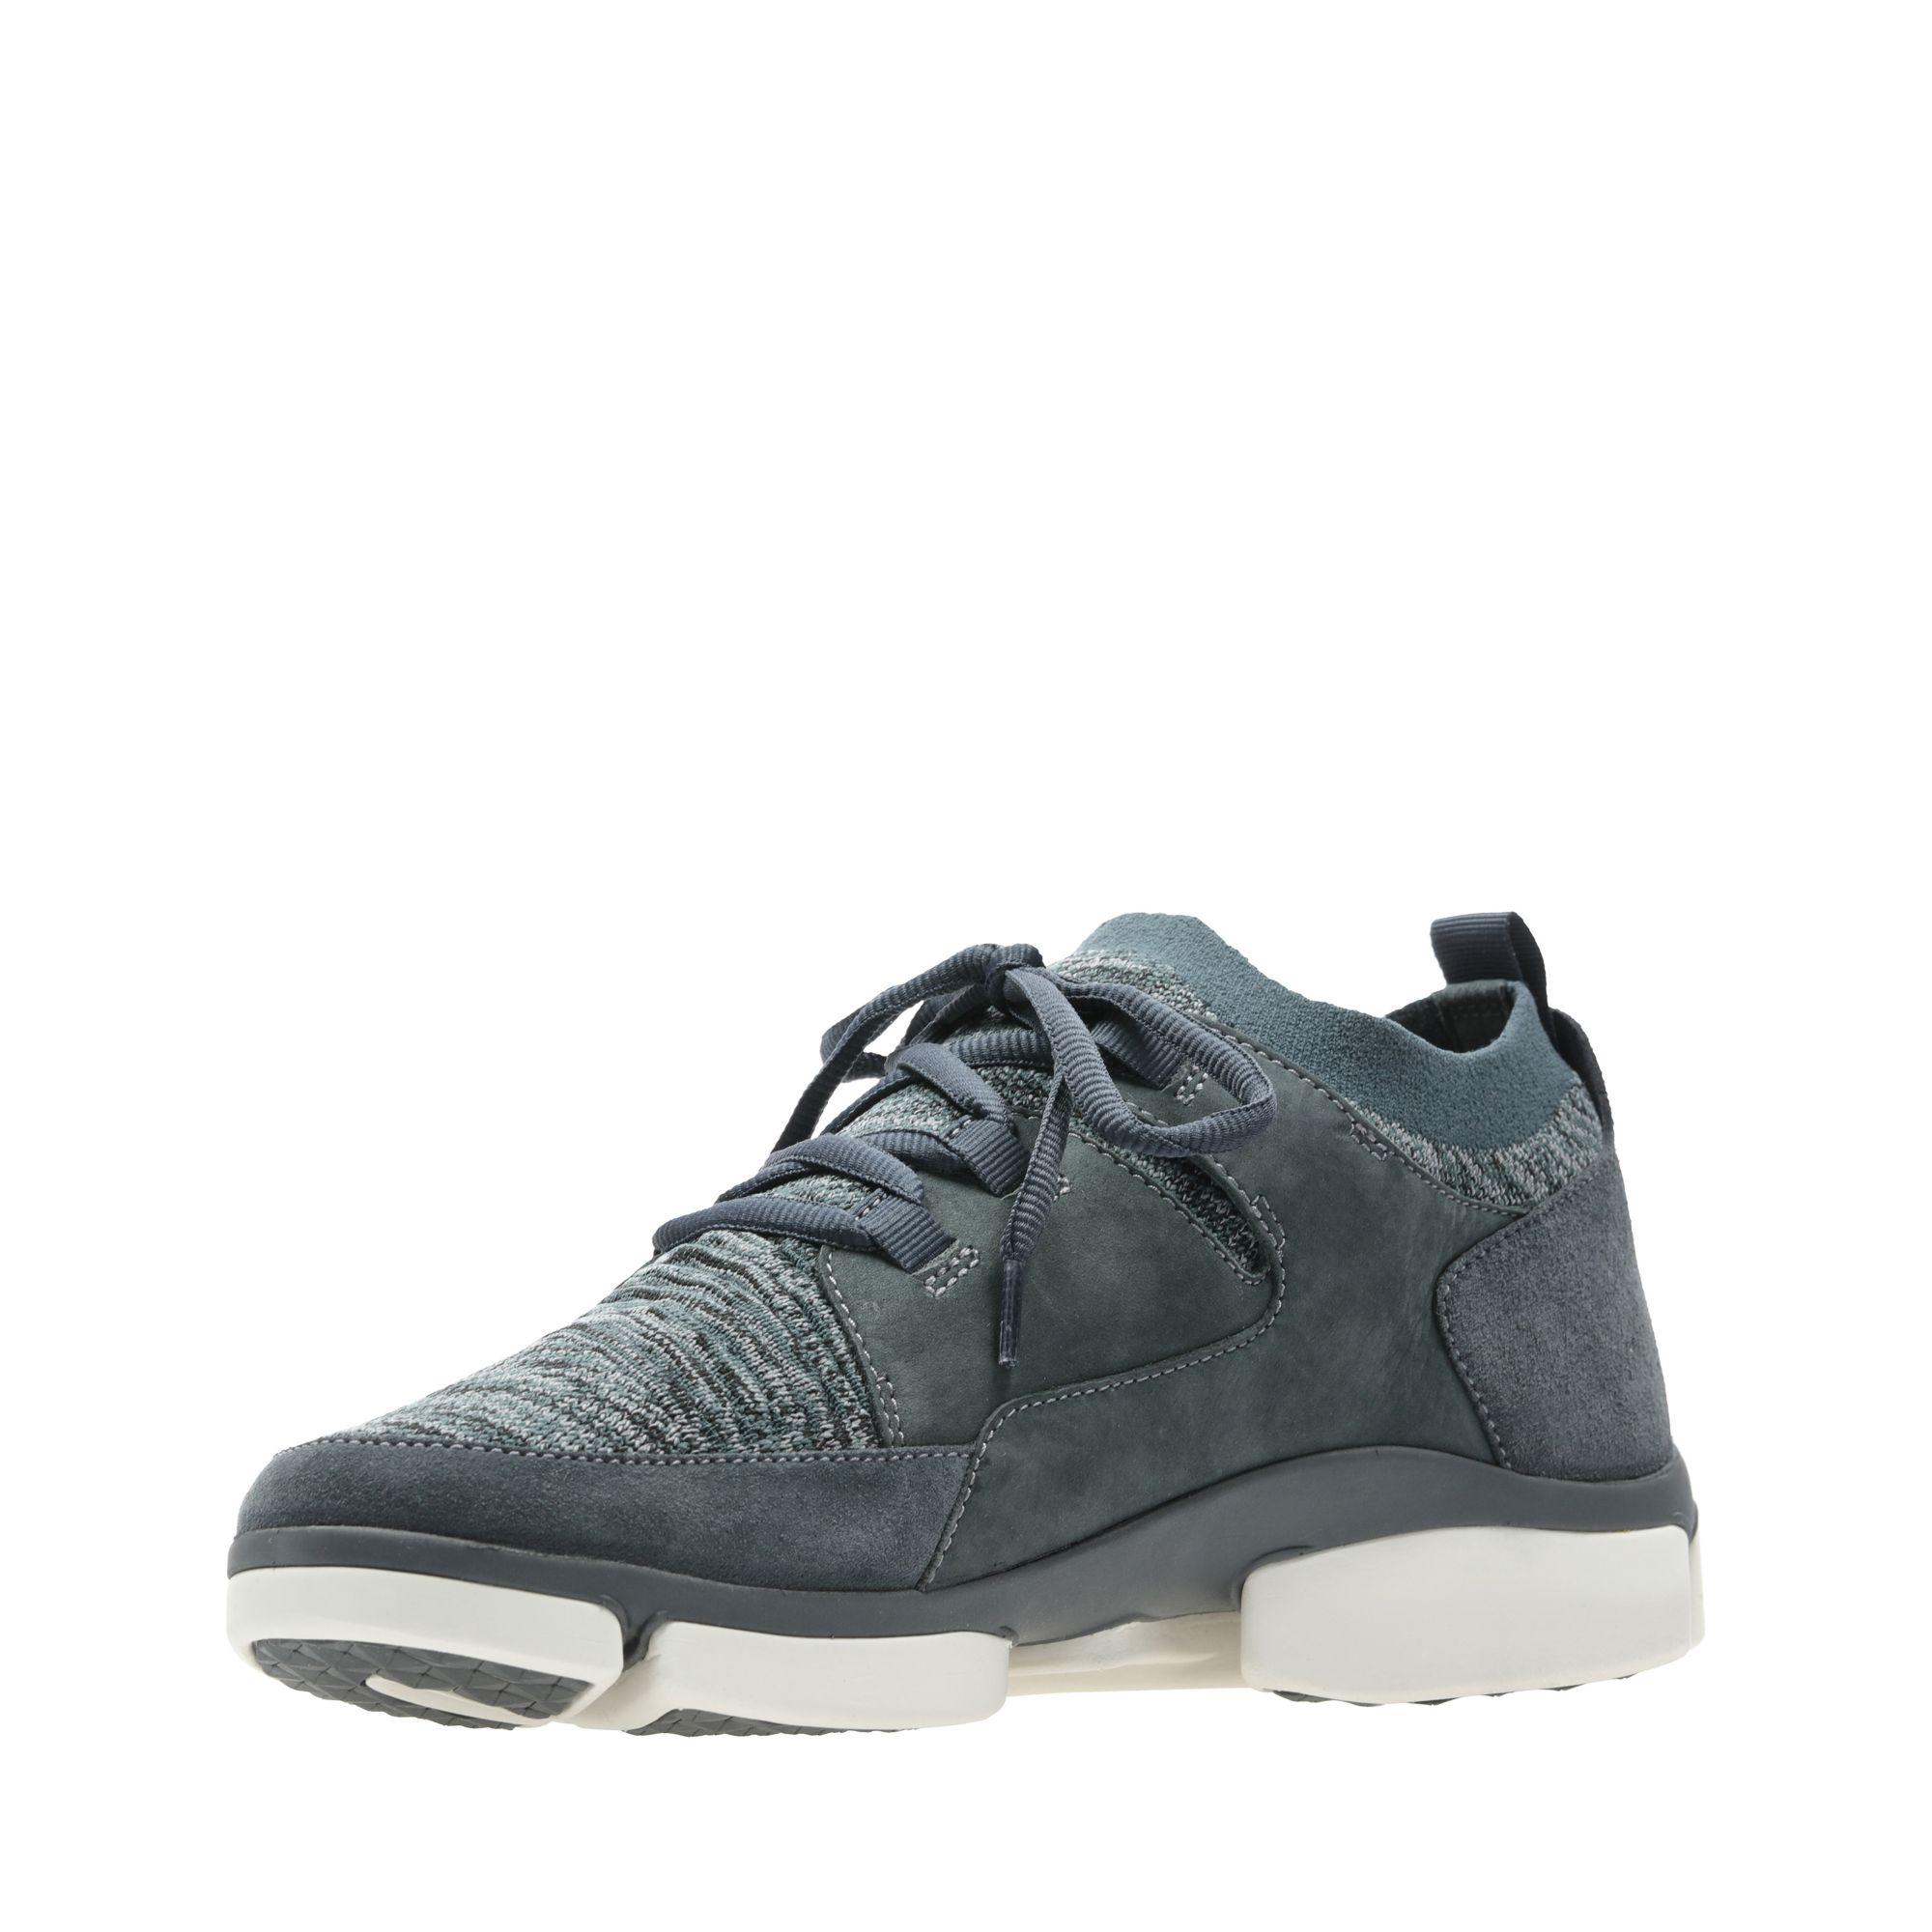 Clarks Suede Triverve Free Trainers in Dark Grey (Gray) for Men - Lyst